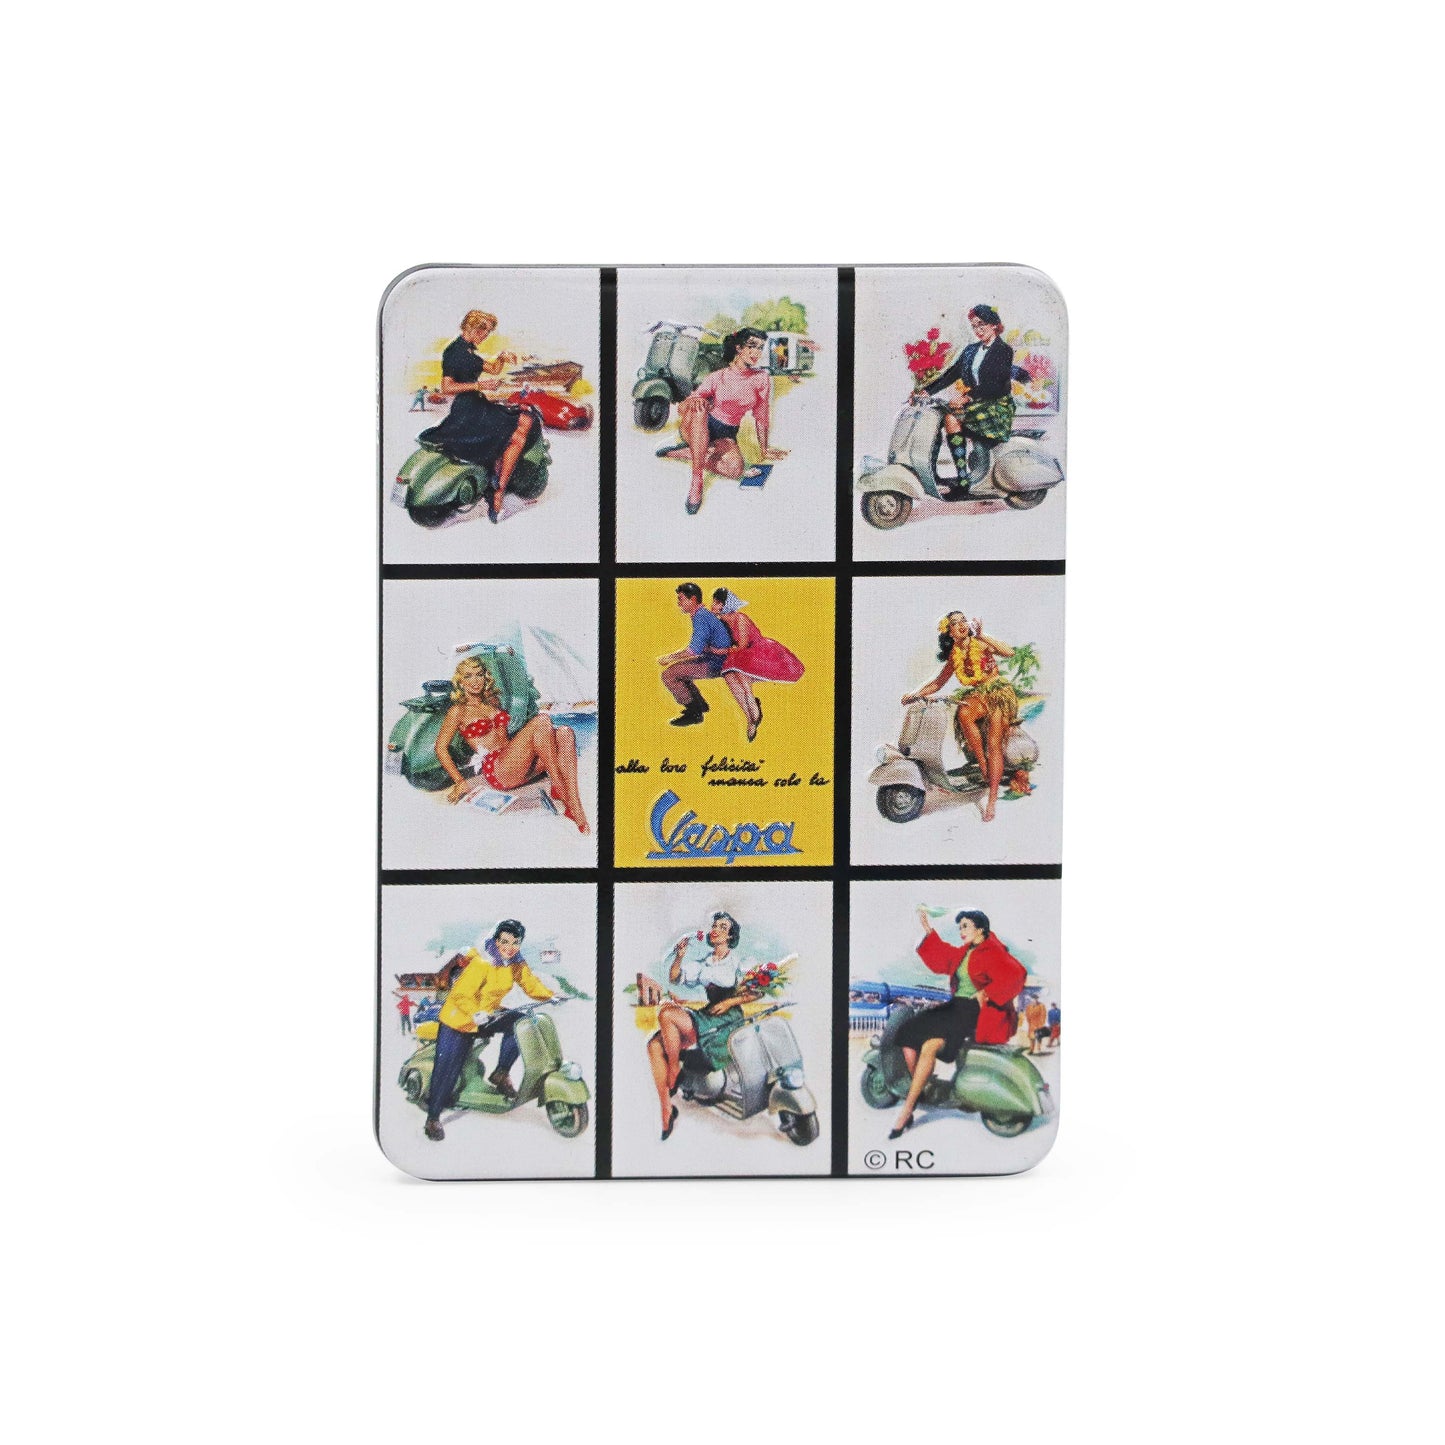 Vespa Motorcycle classic magnet